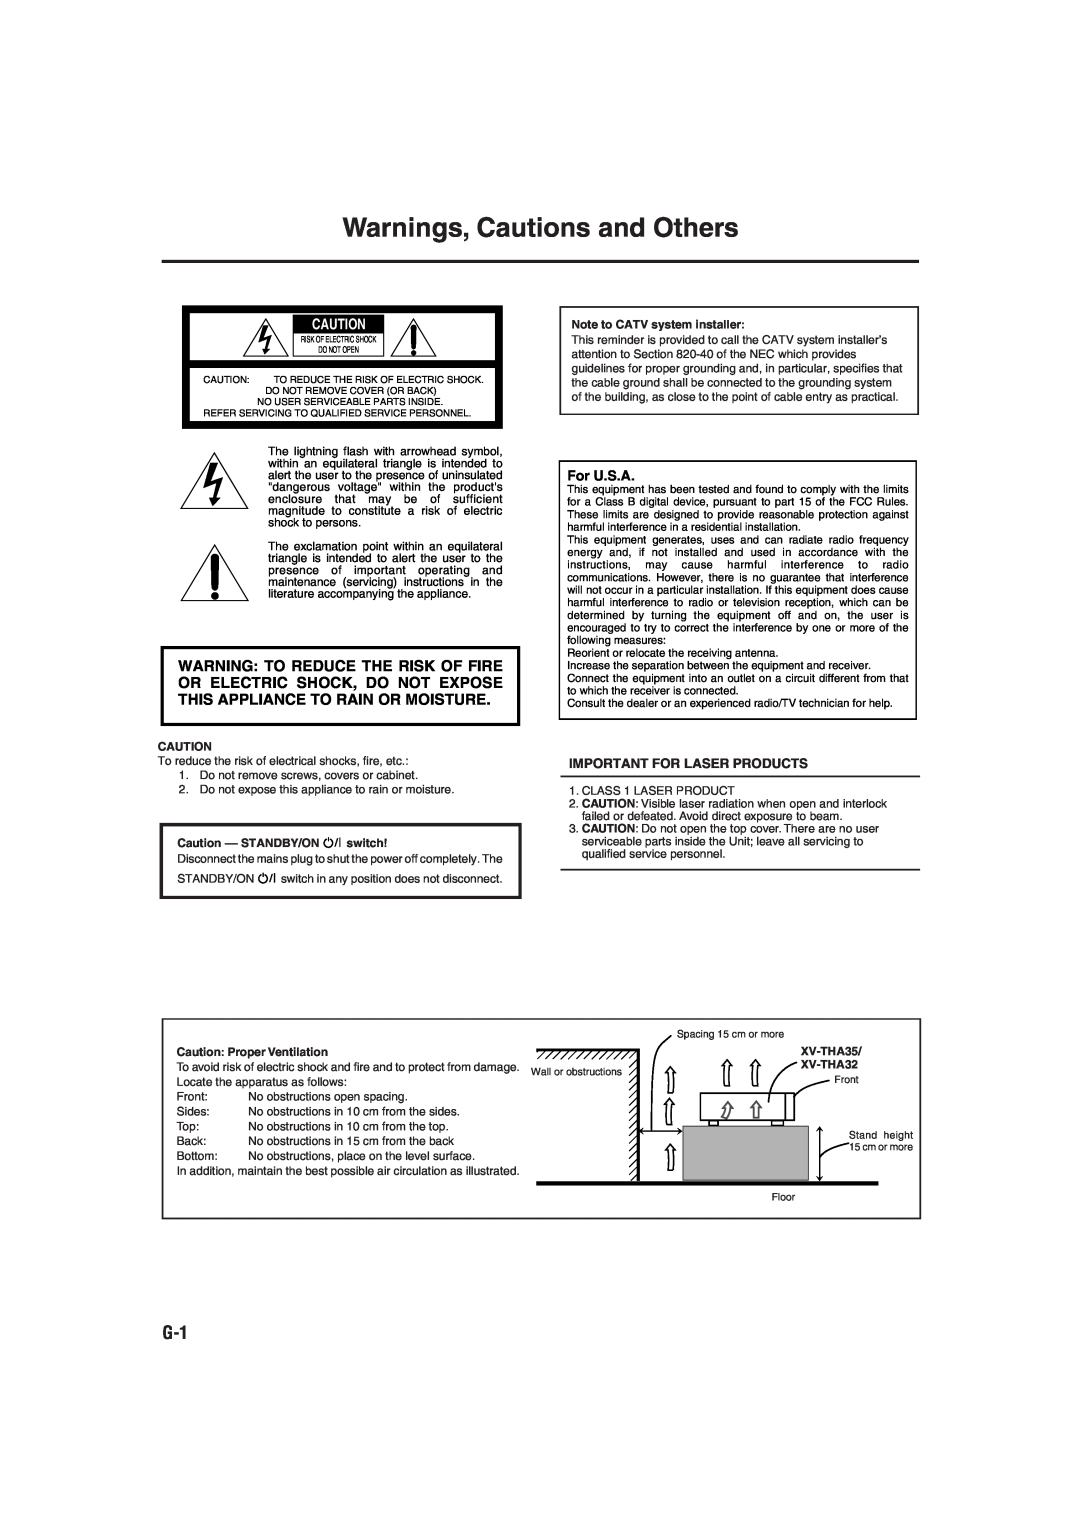 JVC TH-A32 manual Warnings, Cautions and Others, For U.S.A, Important For Laser Products, Caution --STANDBY/ON switch 